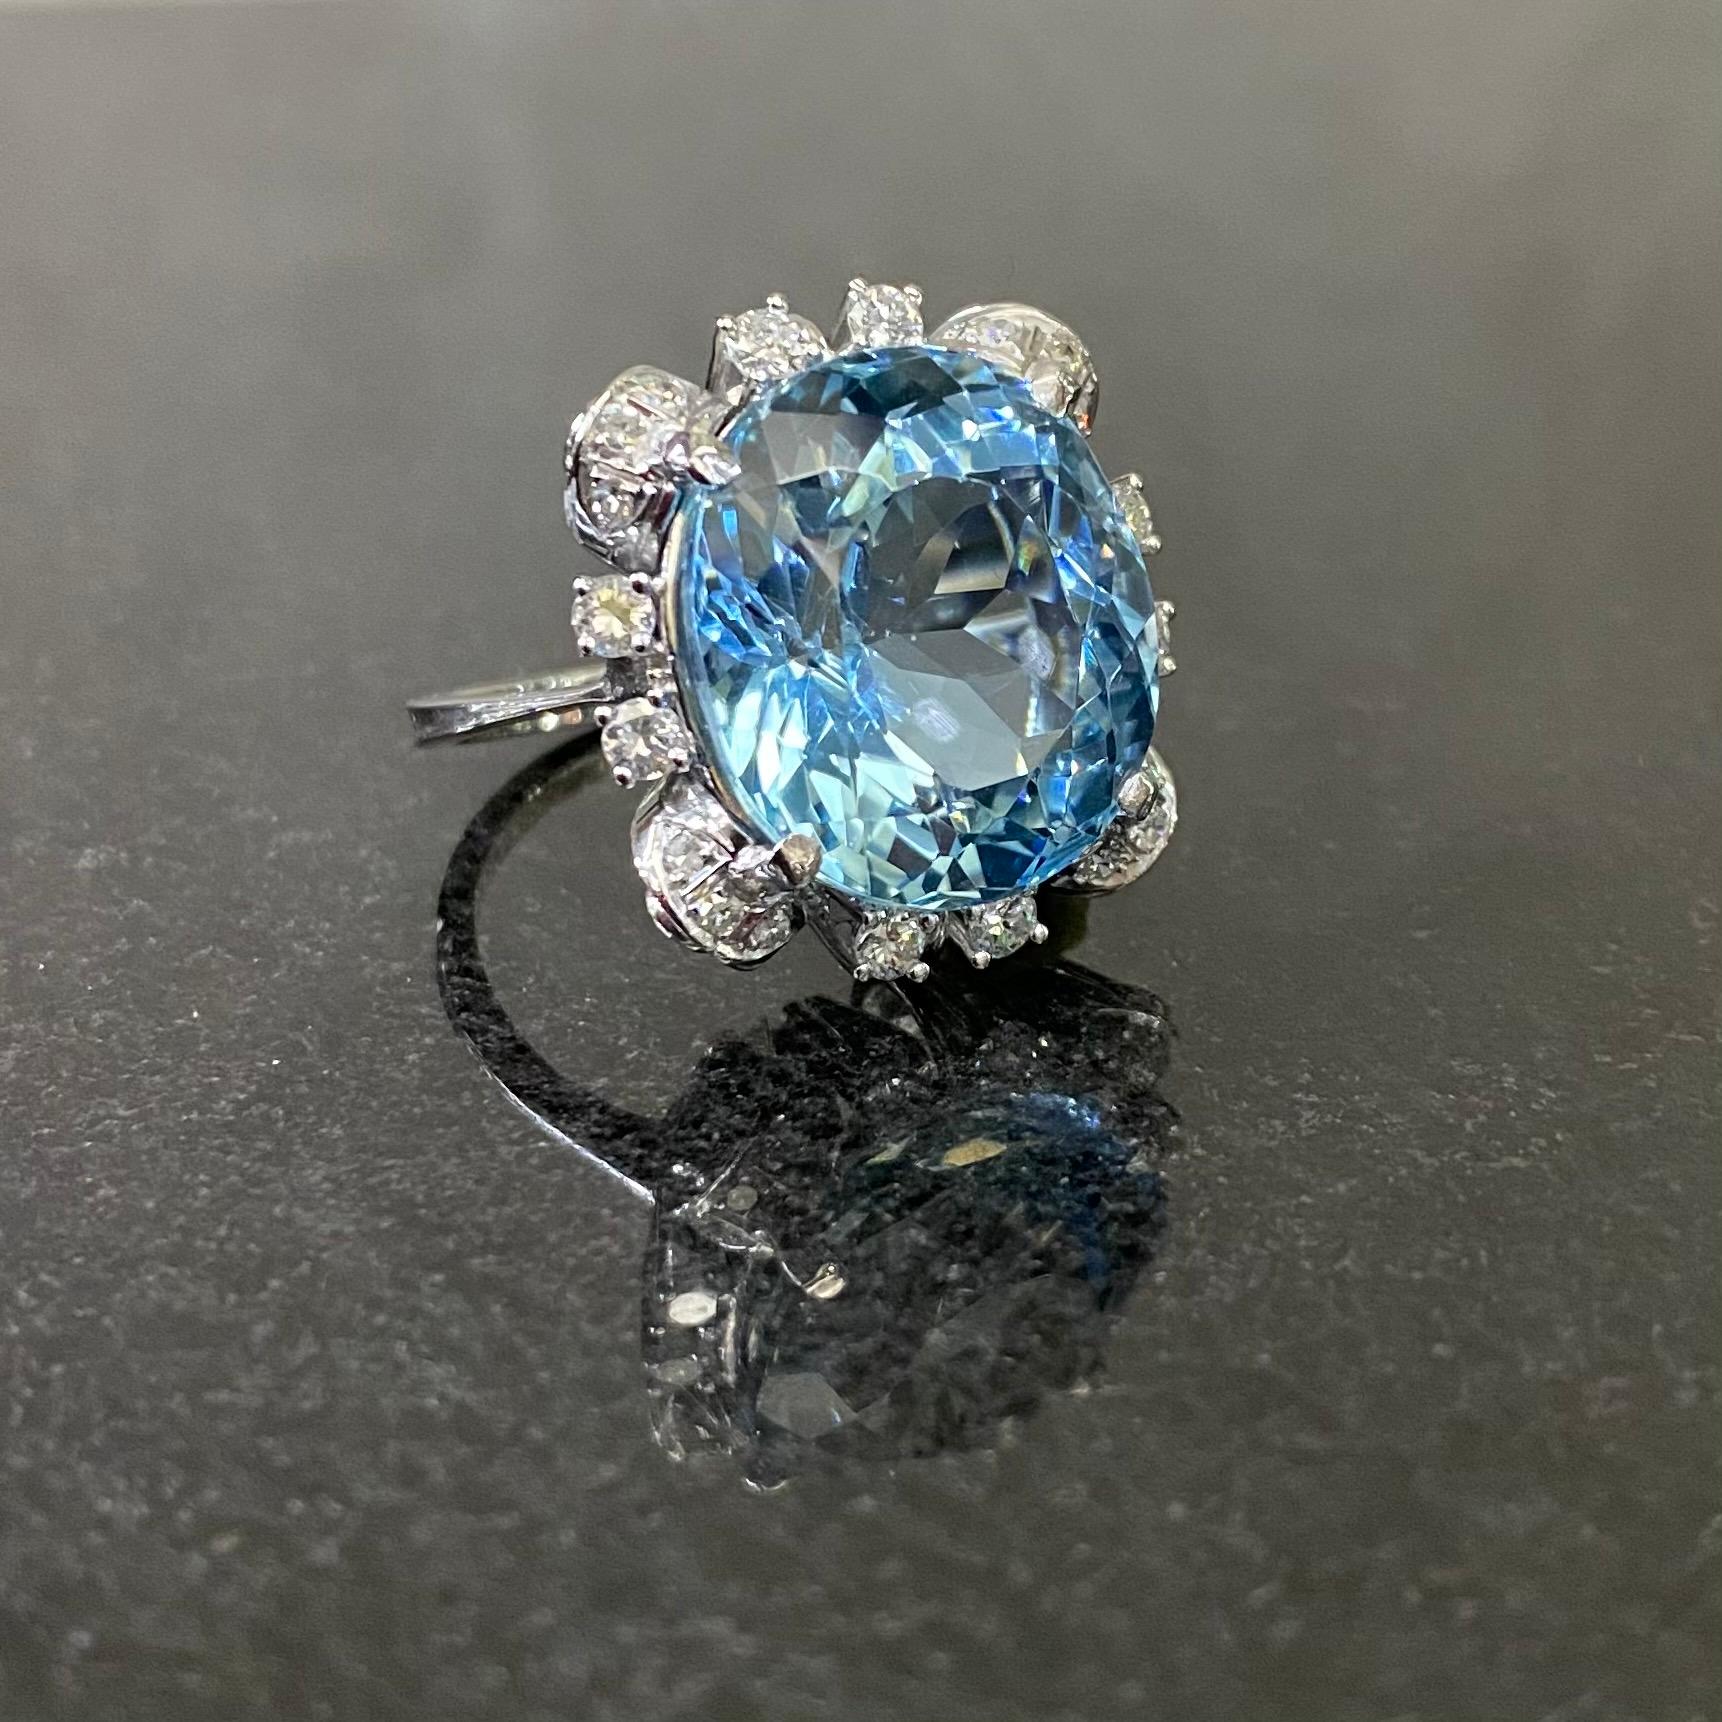 A Mid-Century Aquamarine and Diamond Cocktail Cluster Ring in White Gold, Portugal, c. 1952-1975. Featuring an intense blue oval-cut aquamarine claw-set to the centre, encircled by 20 round brilliant-cut and single-cut diamonds, to an architectural